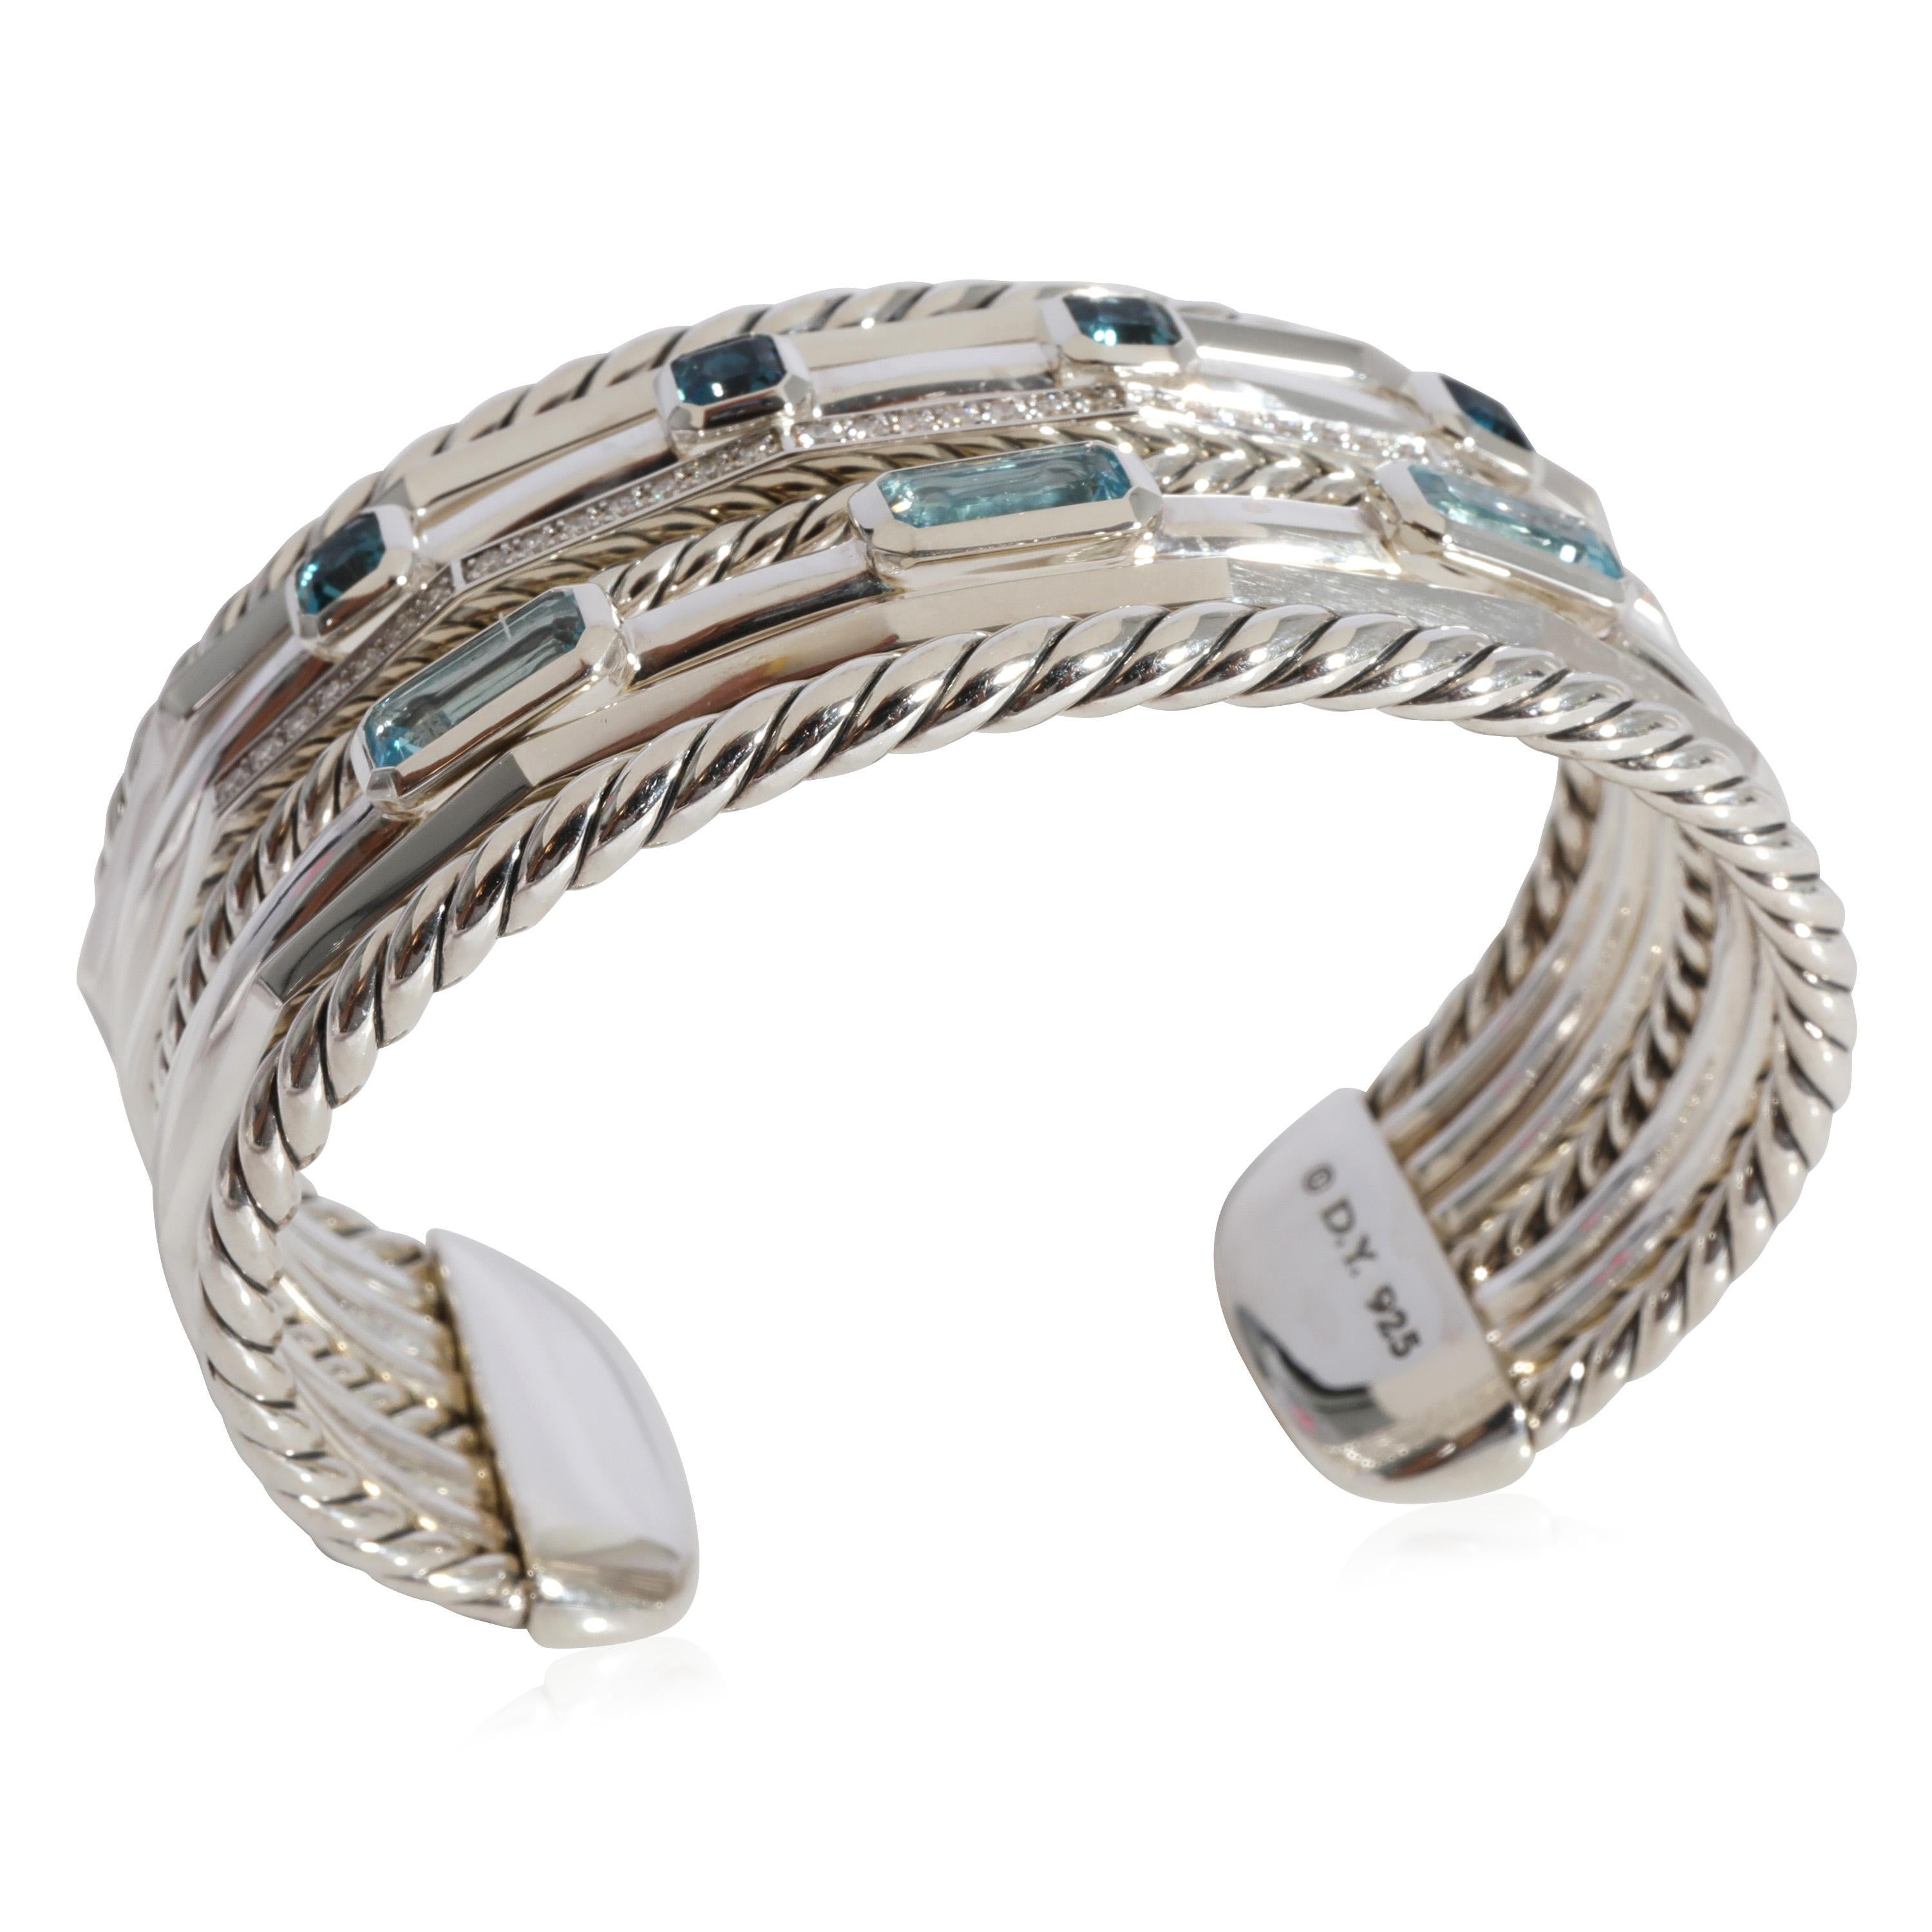 David Yurman Stax Bracelet in 925 Sterling Silver 0.37 CTW

PRIMARY DETAILS
SKU: 125013
Listing Title: David Yurman Stax Bracelet in 925 Sterling Silver 0.37 CTW
Condition Description: Retails for 2625 USD. In excellent condition and recently